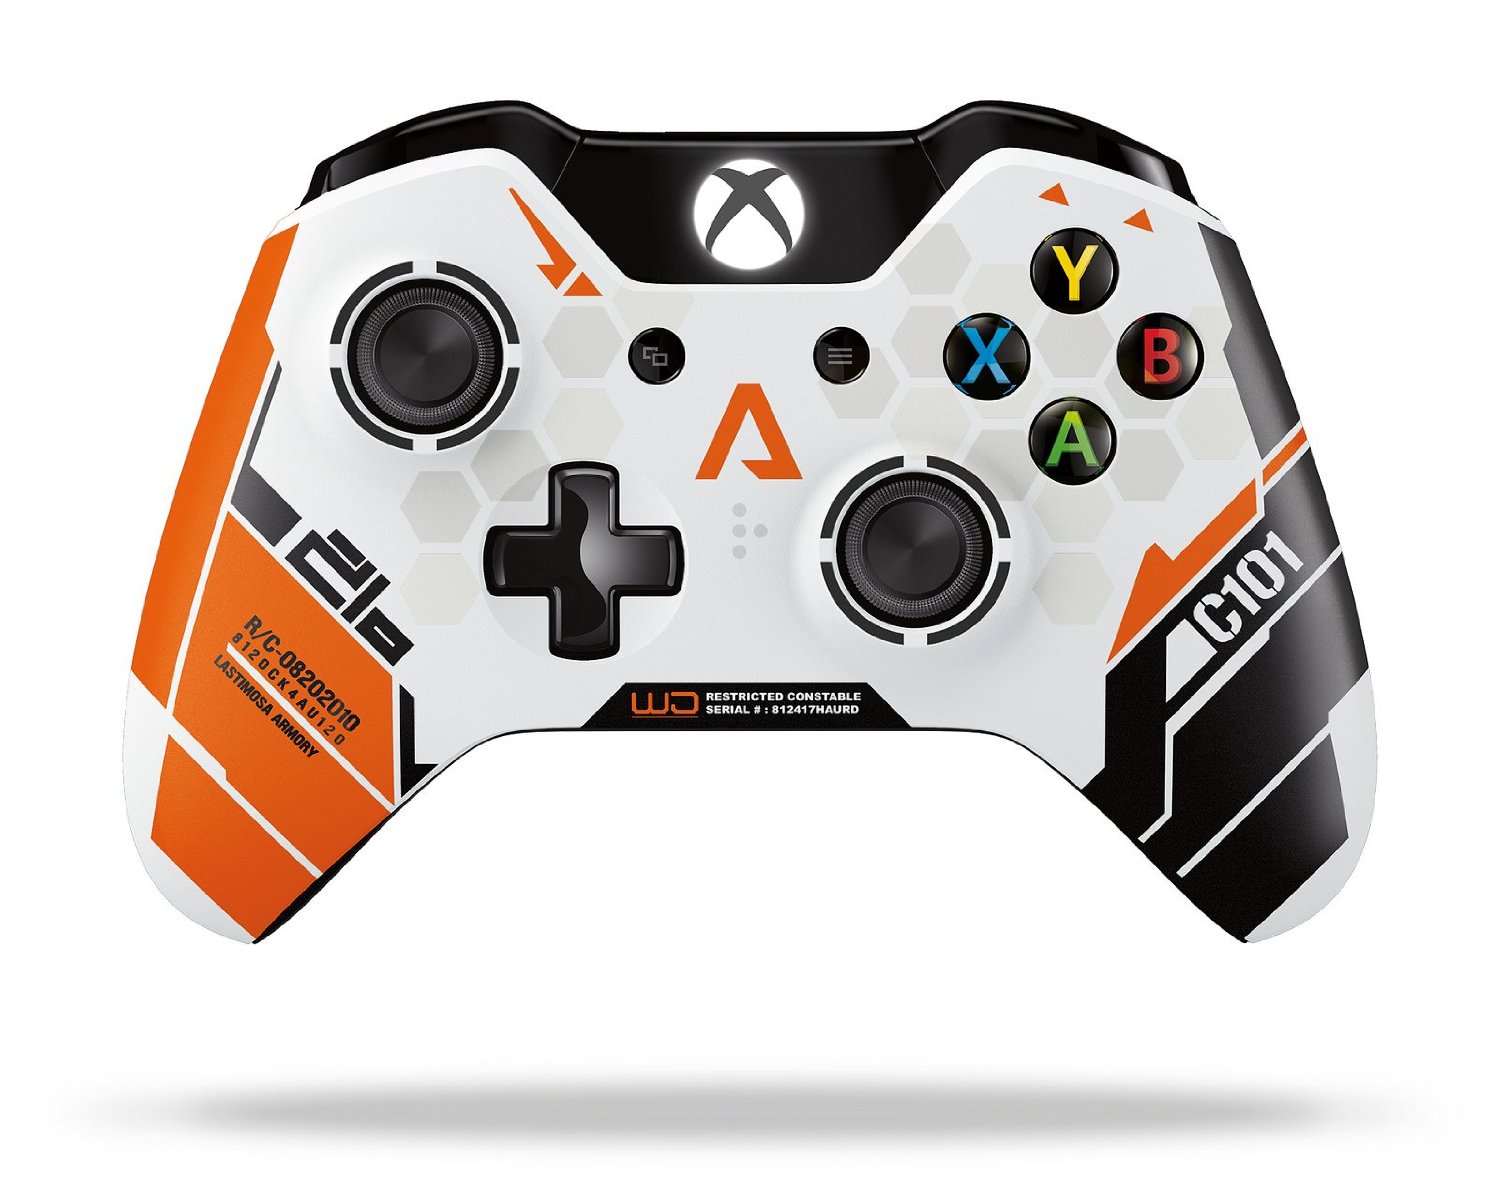 Xbox One Wireless Controller - Titanfall Limited Edition